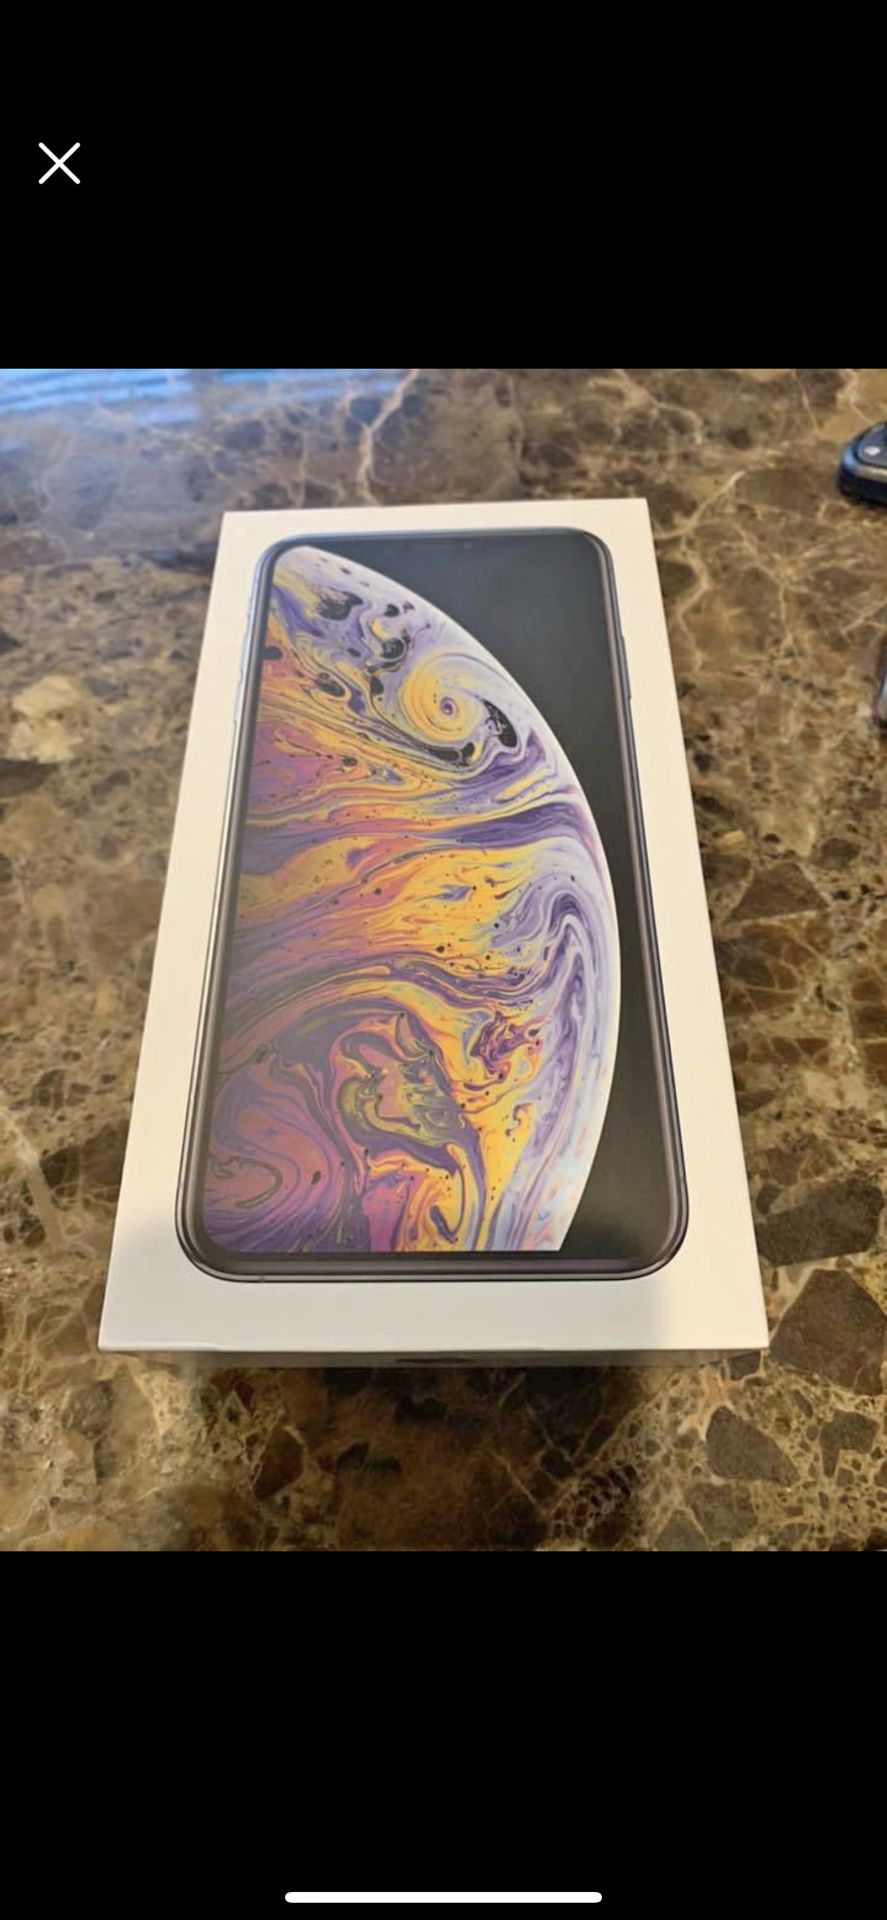 Apple iPhone XS Max Gold